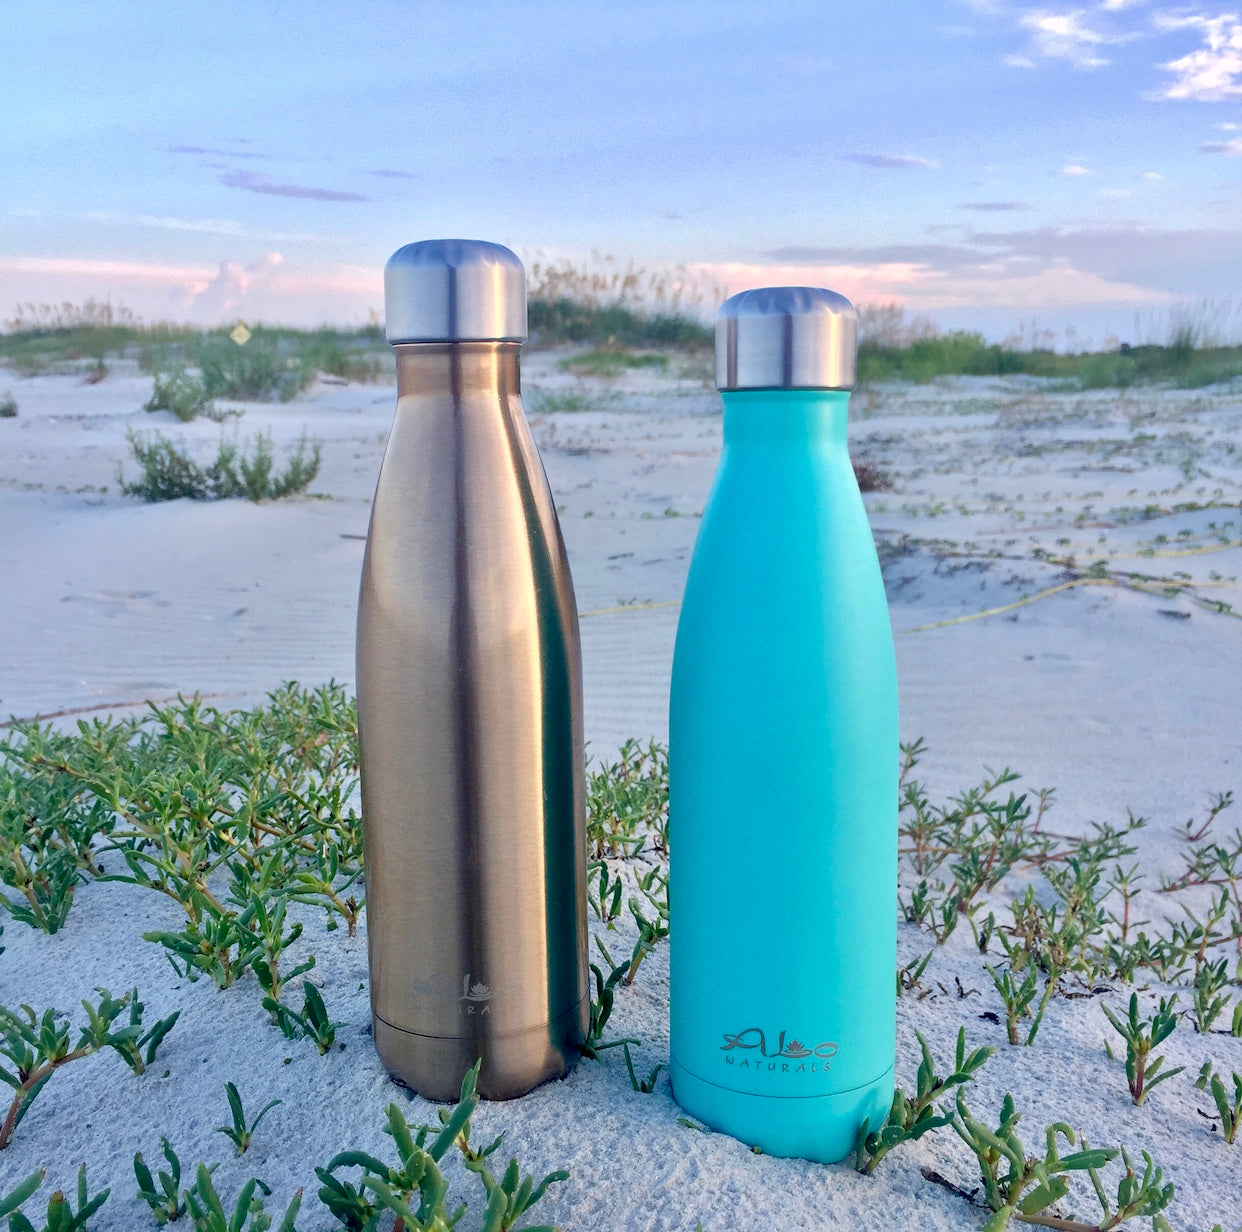 Top Ten Reasons To Use ALo Naturals Stainless Steel Bottles!